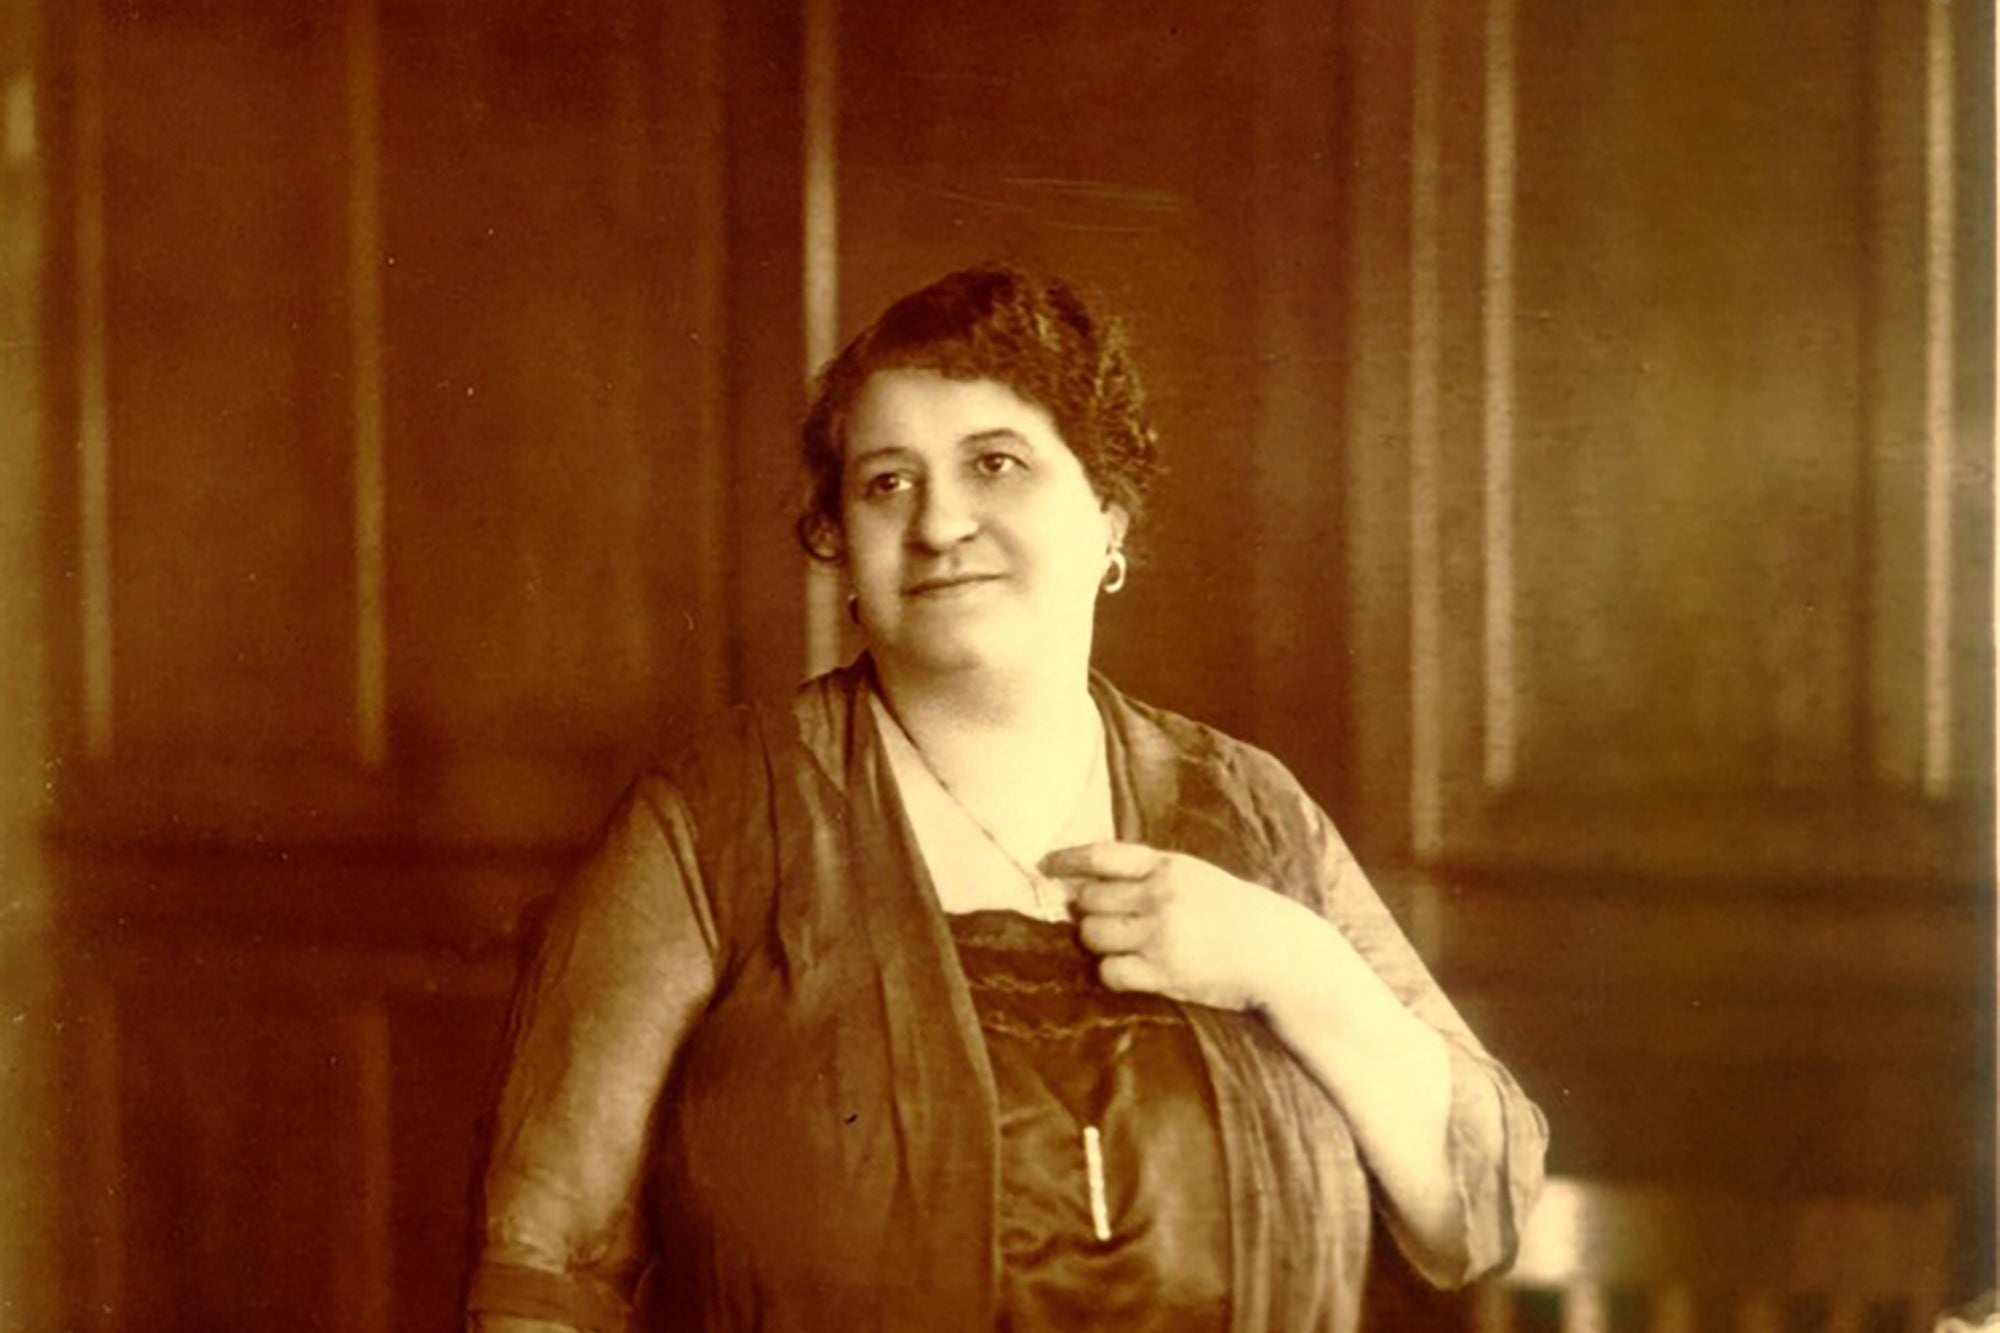 Maggie Lena Walker Made History as the First Woman To Own a Bank in the United States